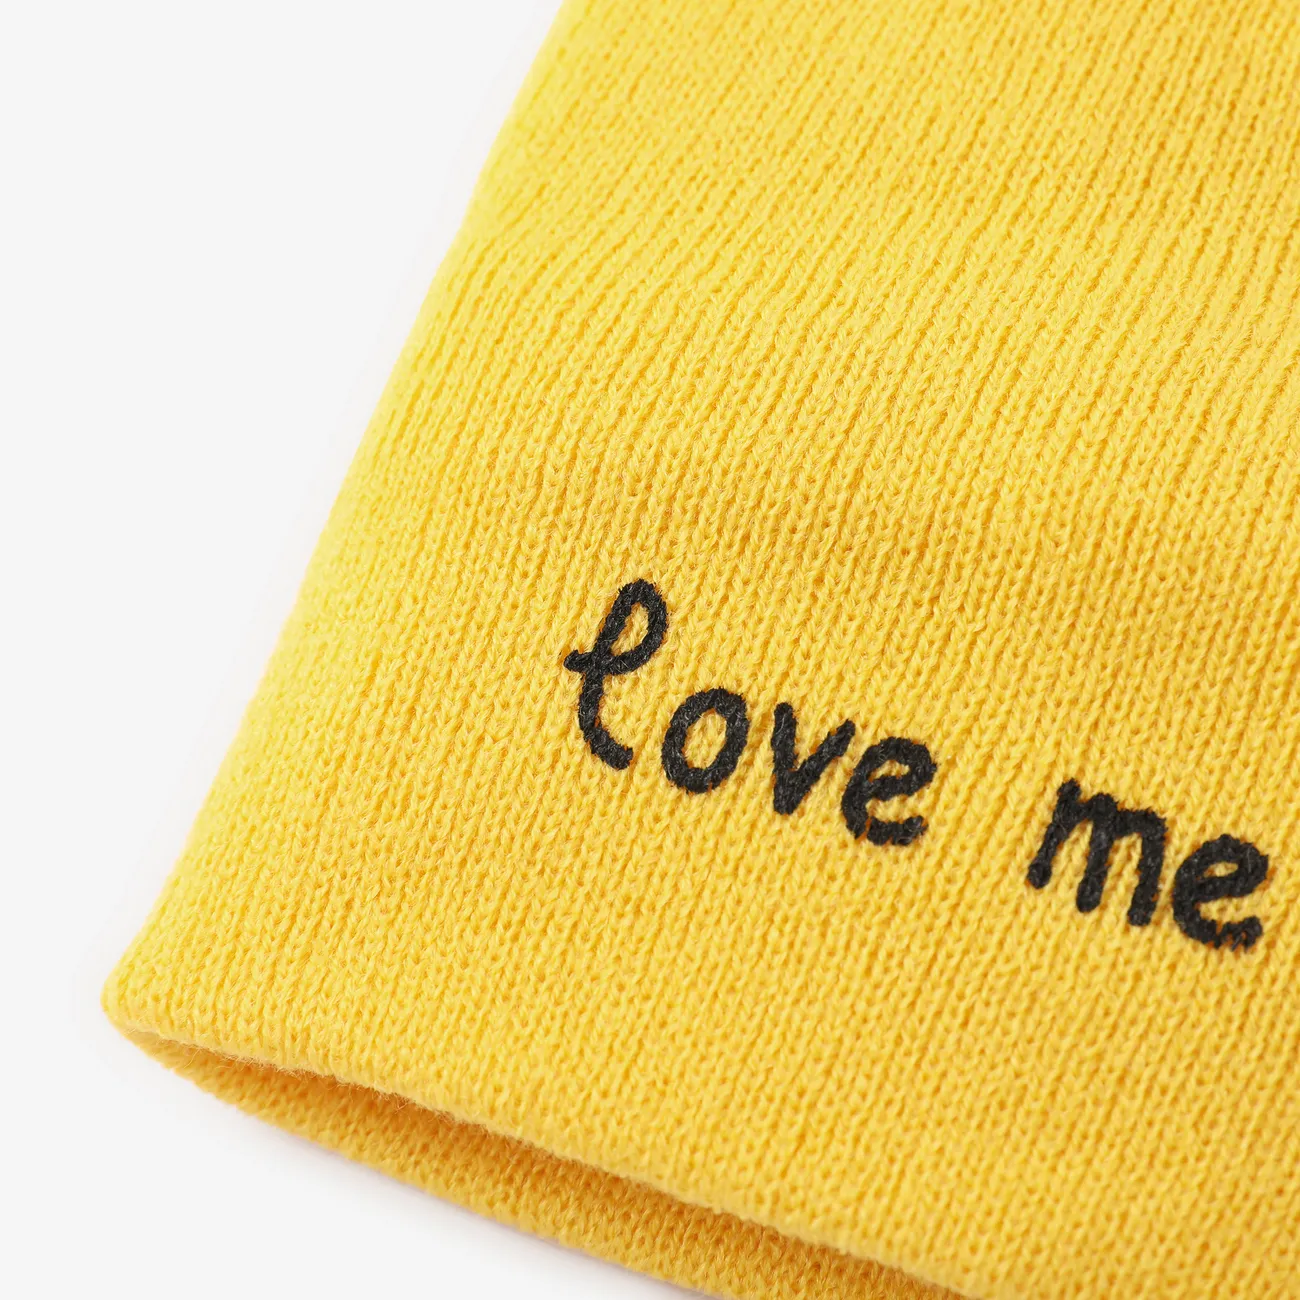 2-pack Baby / Toddler Double Pompon Letter Print Knit Beanie Hat and Scarf Set Yellow big image 1